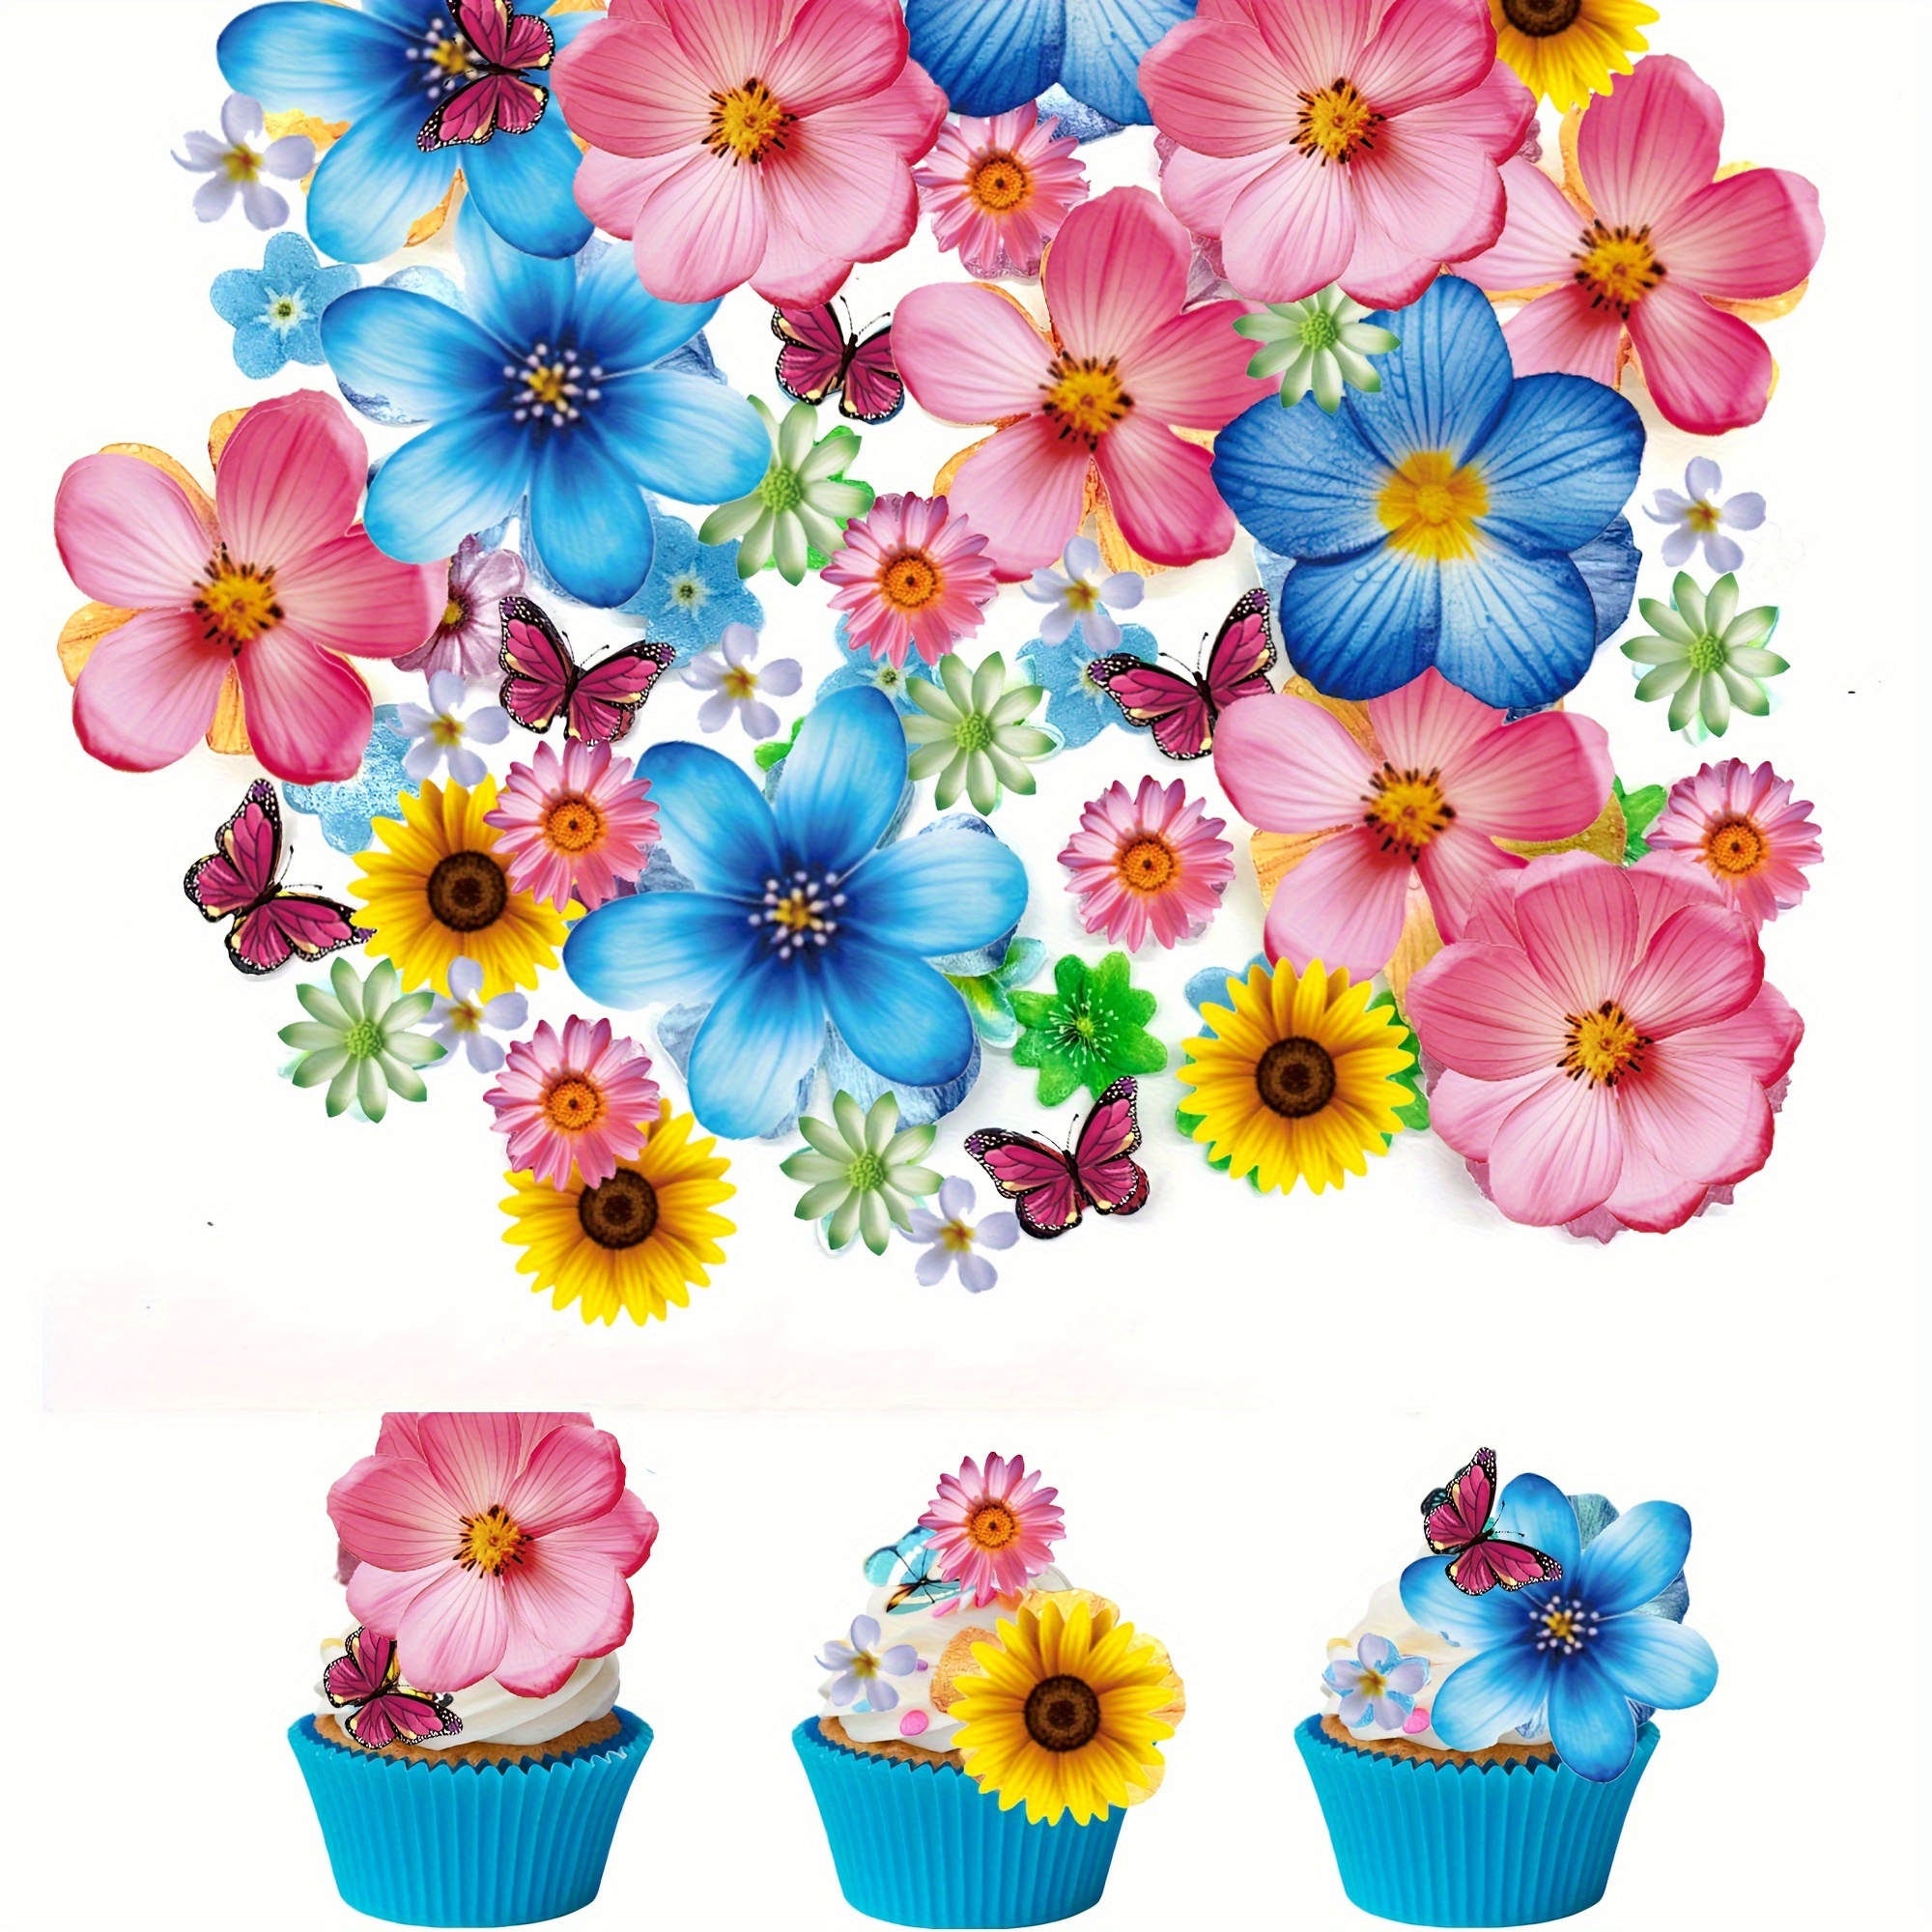 

54pcs Butterfly Cake Top, Paper Cupcake Top, Wedding Theme Party, Birthday Cake Decoration, Mixed Sizes And Colors